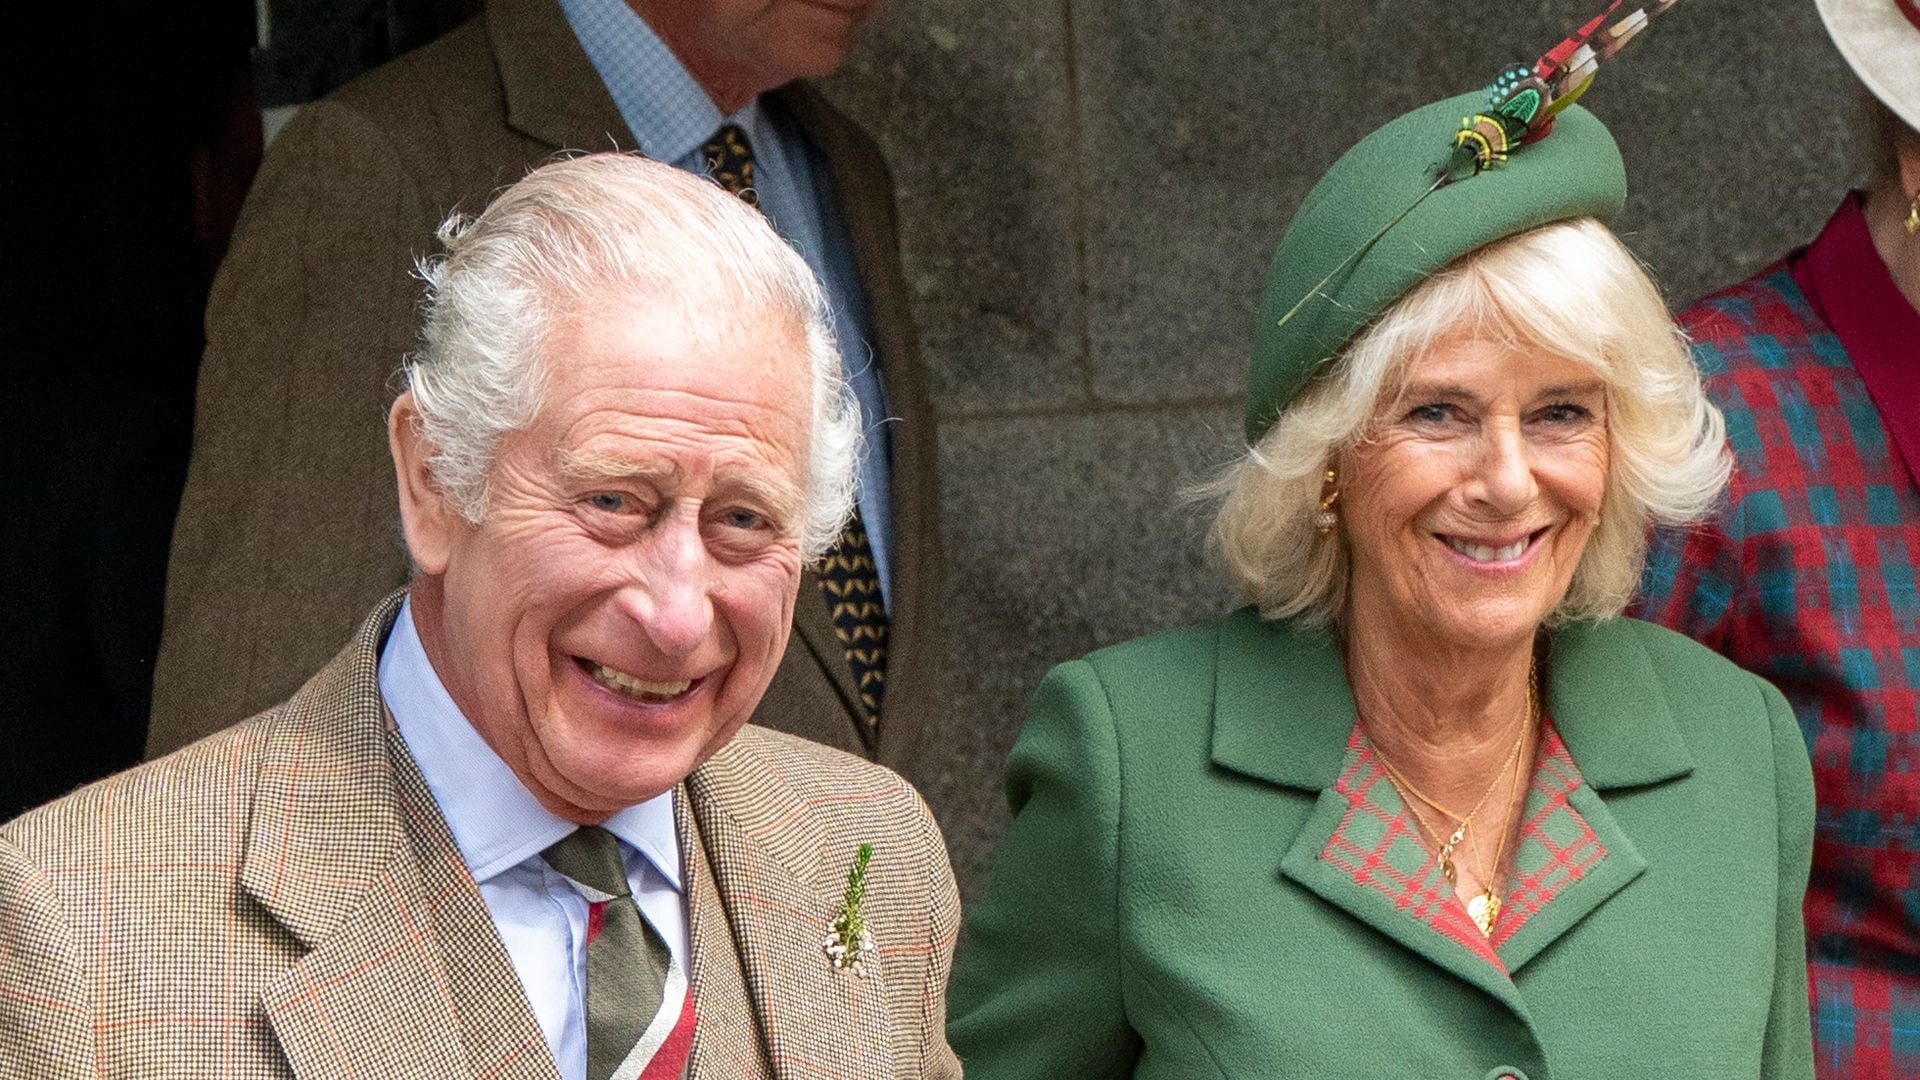 King Charles III, Queen Camilla, Princess Anne, Princess Royal and Prime Minister Rishi Sunak and Akshata Murthy attend divine service at Crathie Church, Balmoral on September 3, 2023 